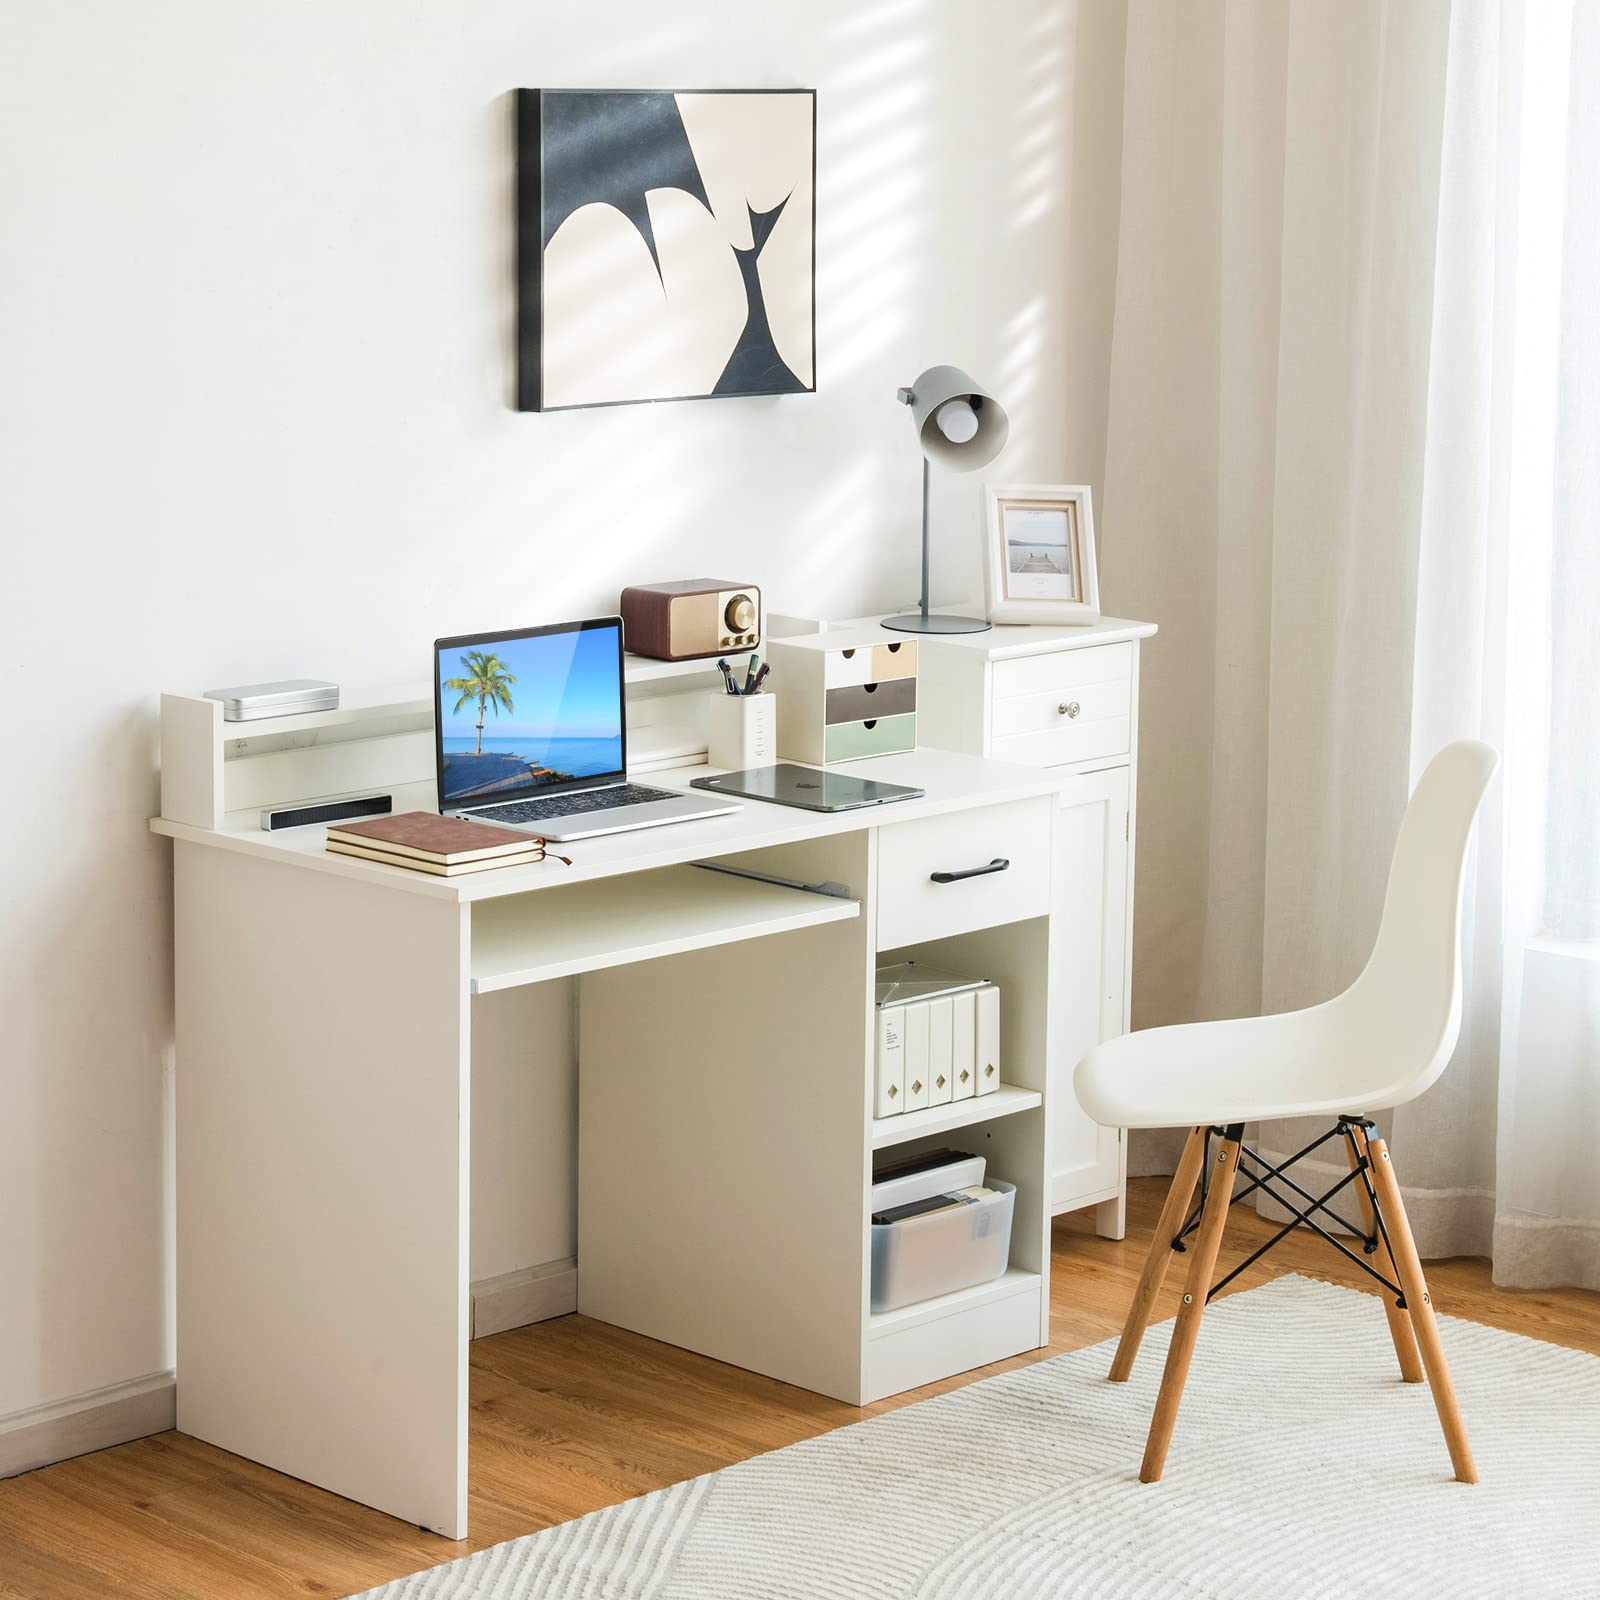  Tangkula White Desk with Storage Drawer & Shelves, Compact Desk  for Small Space, Modern Wooden Study Desk Writing Desk with Storage Drawer  & Compartments, PC Laptop Desk Small Desk for Bedroom 